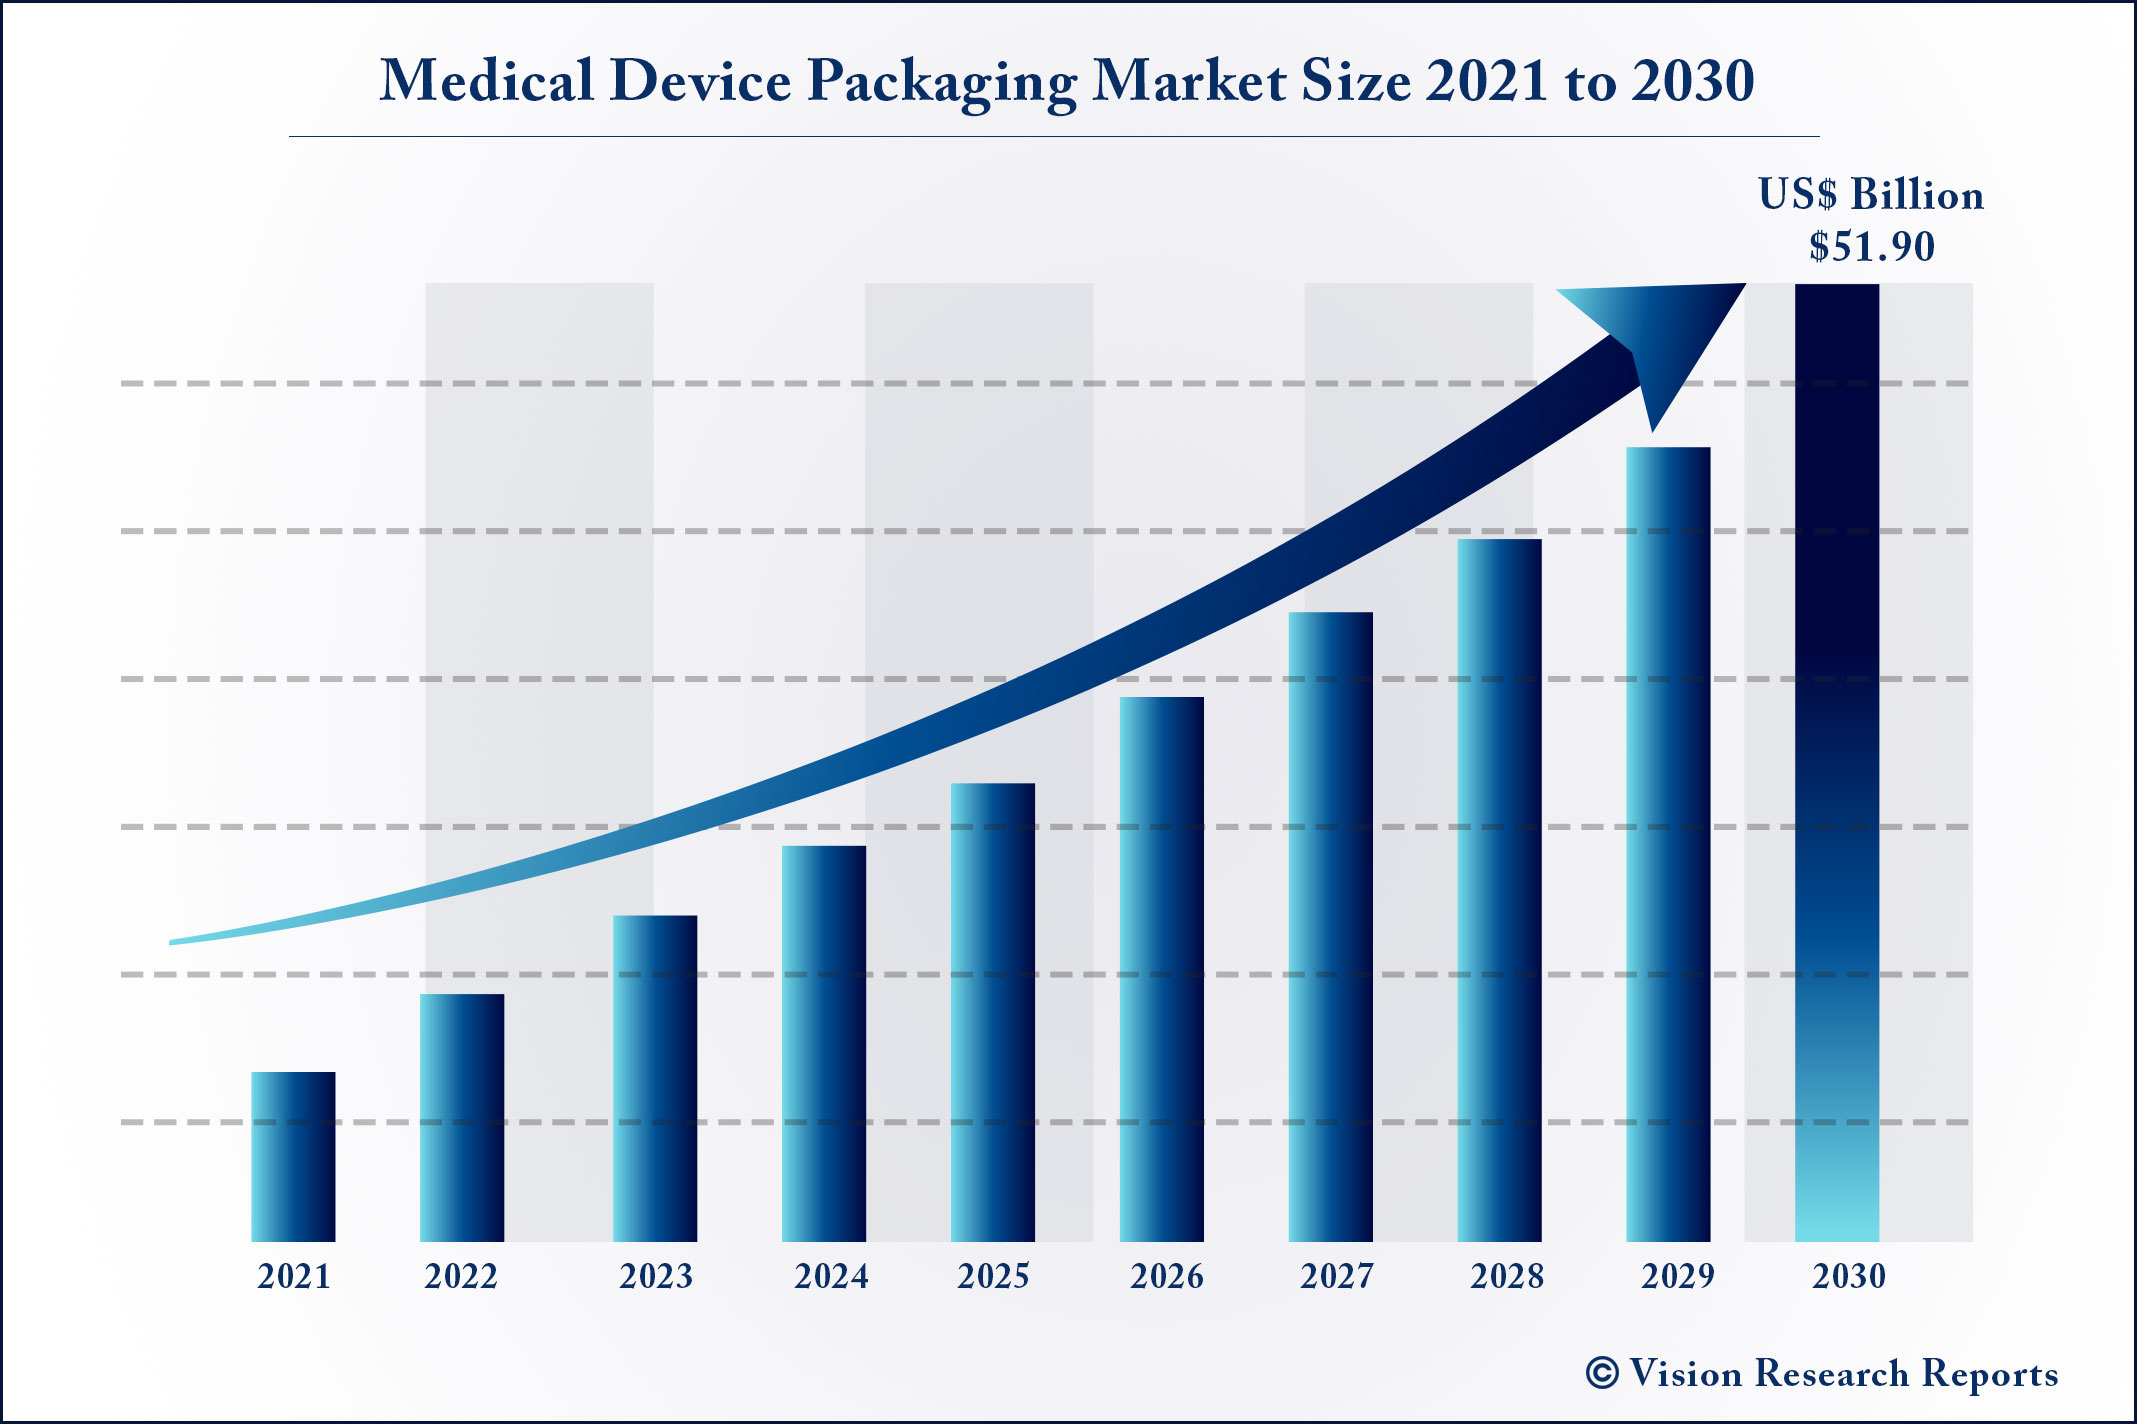 Medical Device Packaging Market Size 2021 to 2030